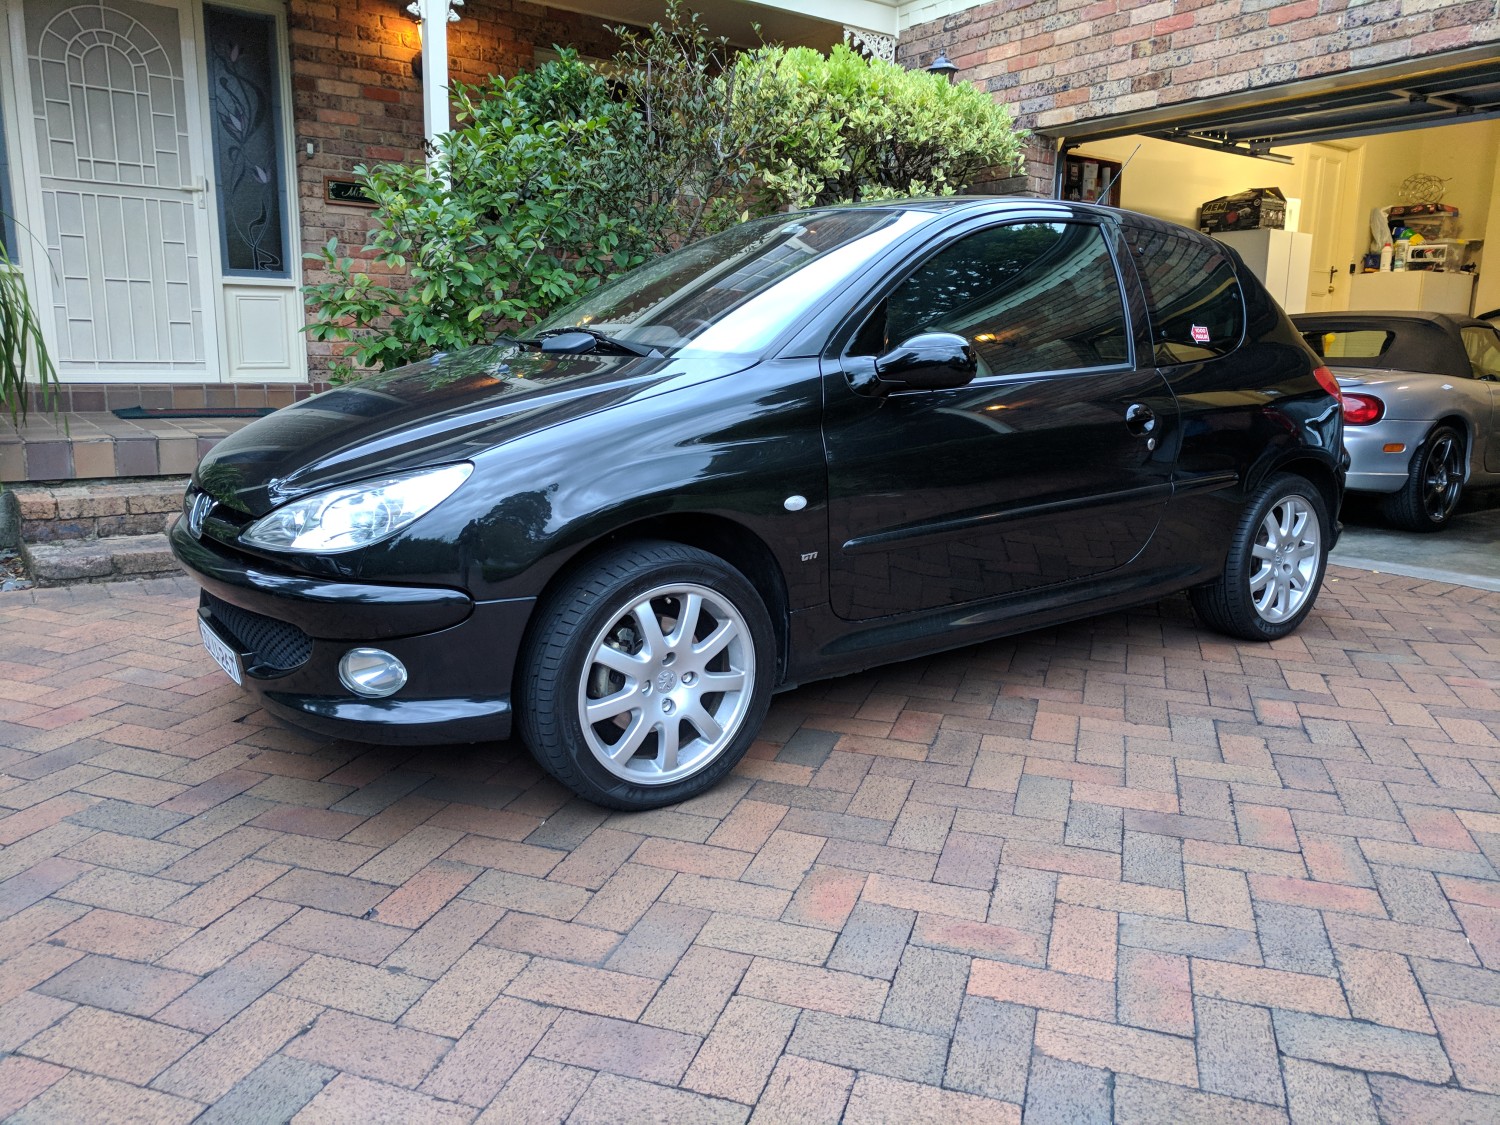 2005 Peugeot 206 GTi marcuscurran Shannons Club